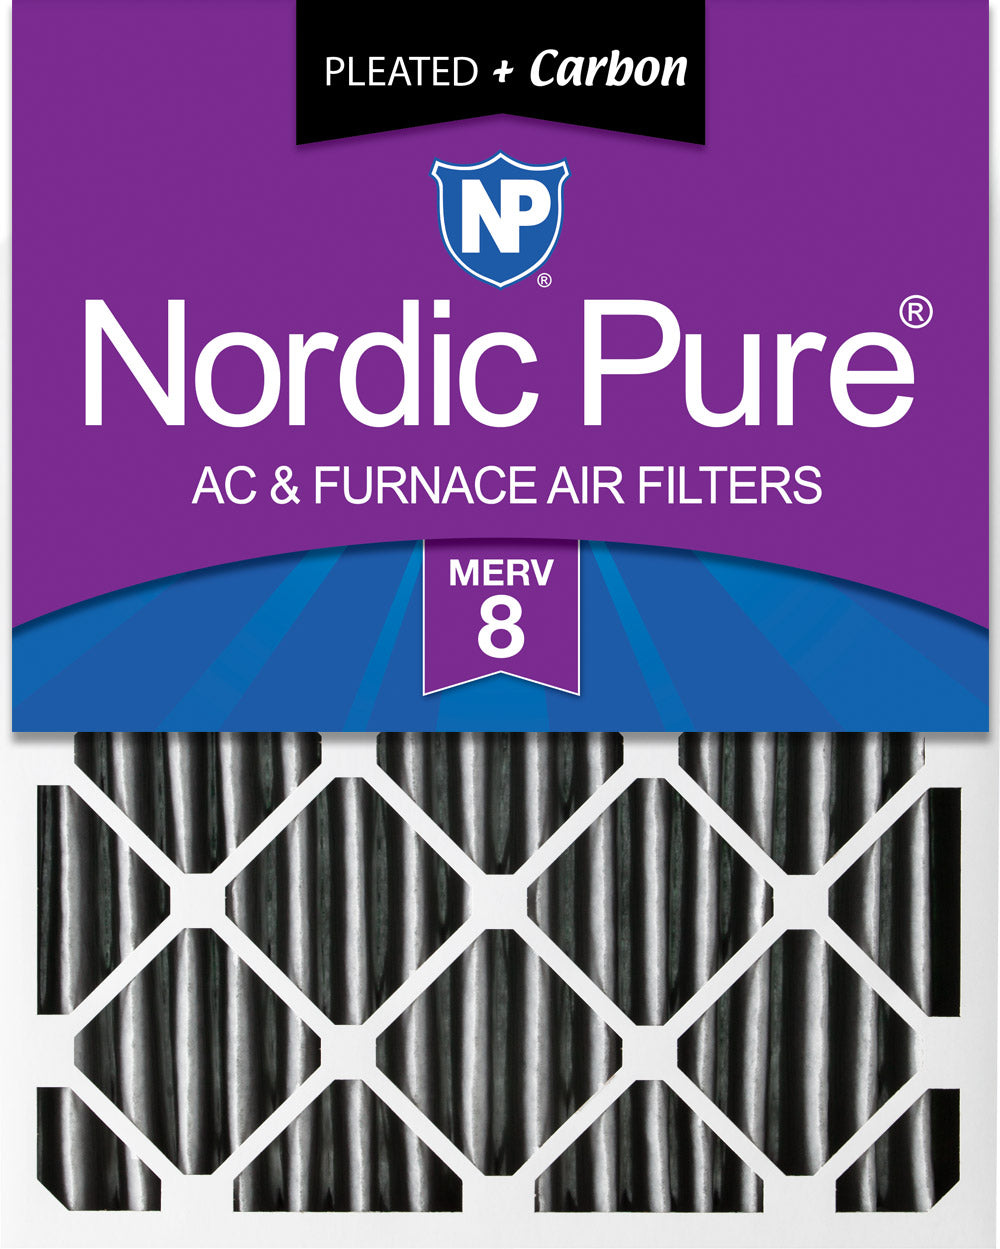 18x24x4 (3 5/8) Furnace Air Filters MERV 8 Pleated Plus Carbon